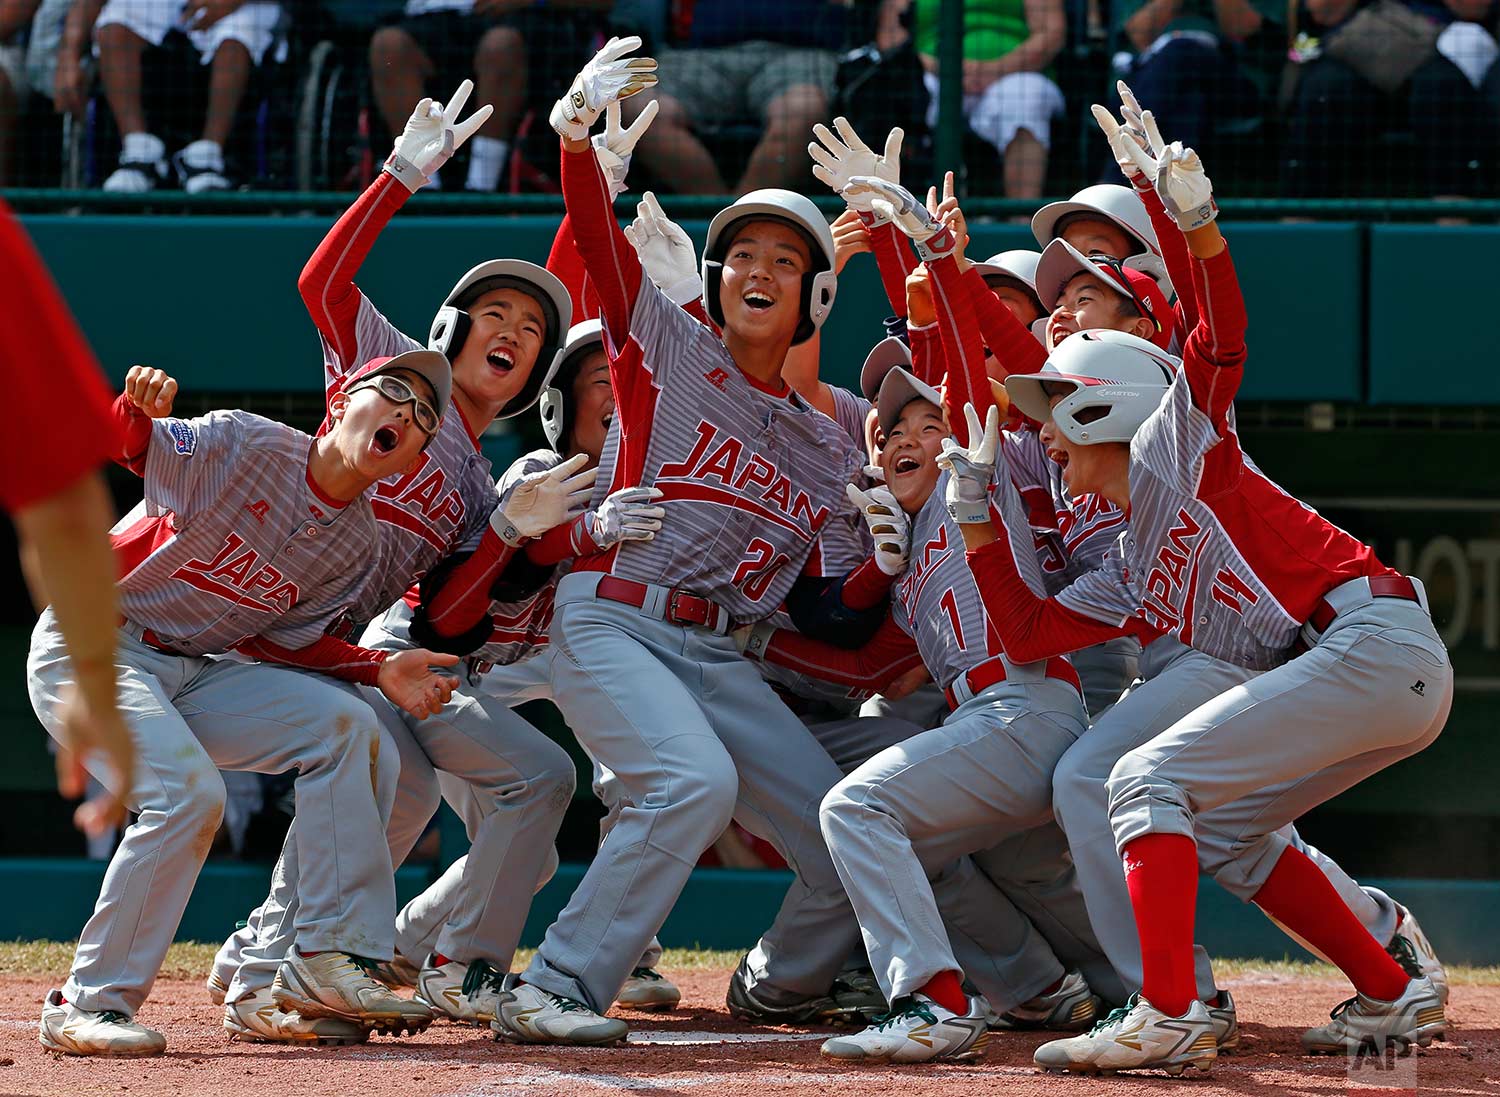  Tokyo, Japan's Natsuki Yajima (20) celebrates with teammates after hitting a two-run home run off White Rock, British Columbia pitcher Reece Ussleman in the third inning of an International baseball game at the Little League World Series tournament 